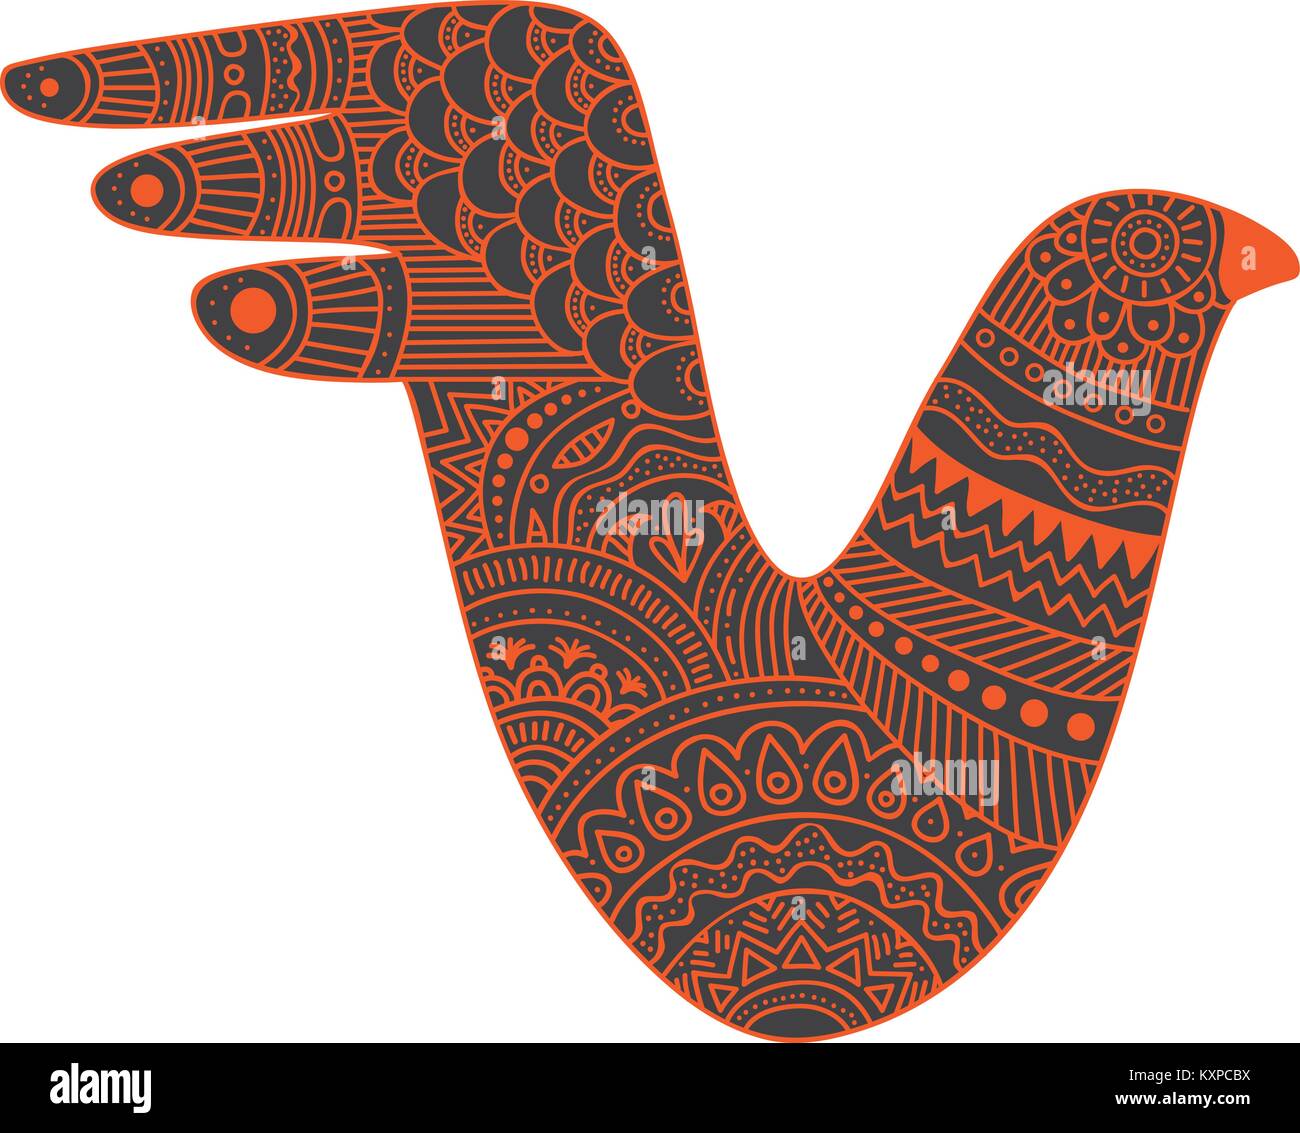 Mystical creatures bird vector illustration with ornate Mexican style pattern Stock Vector